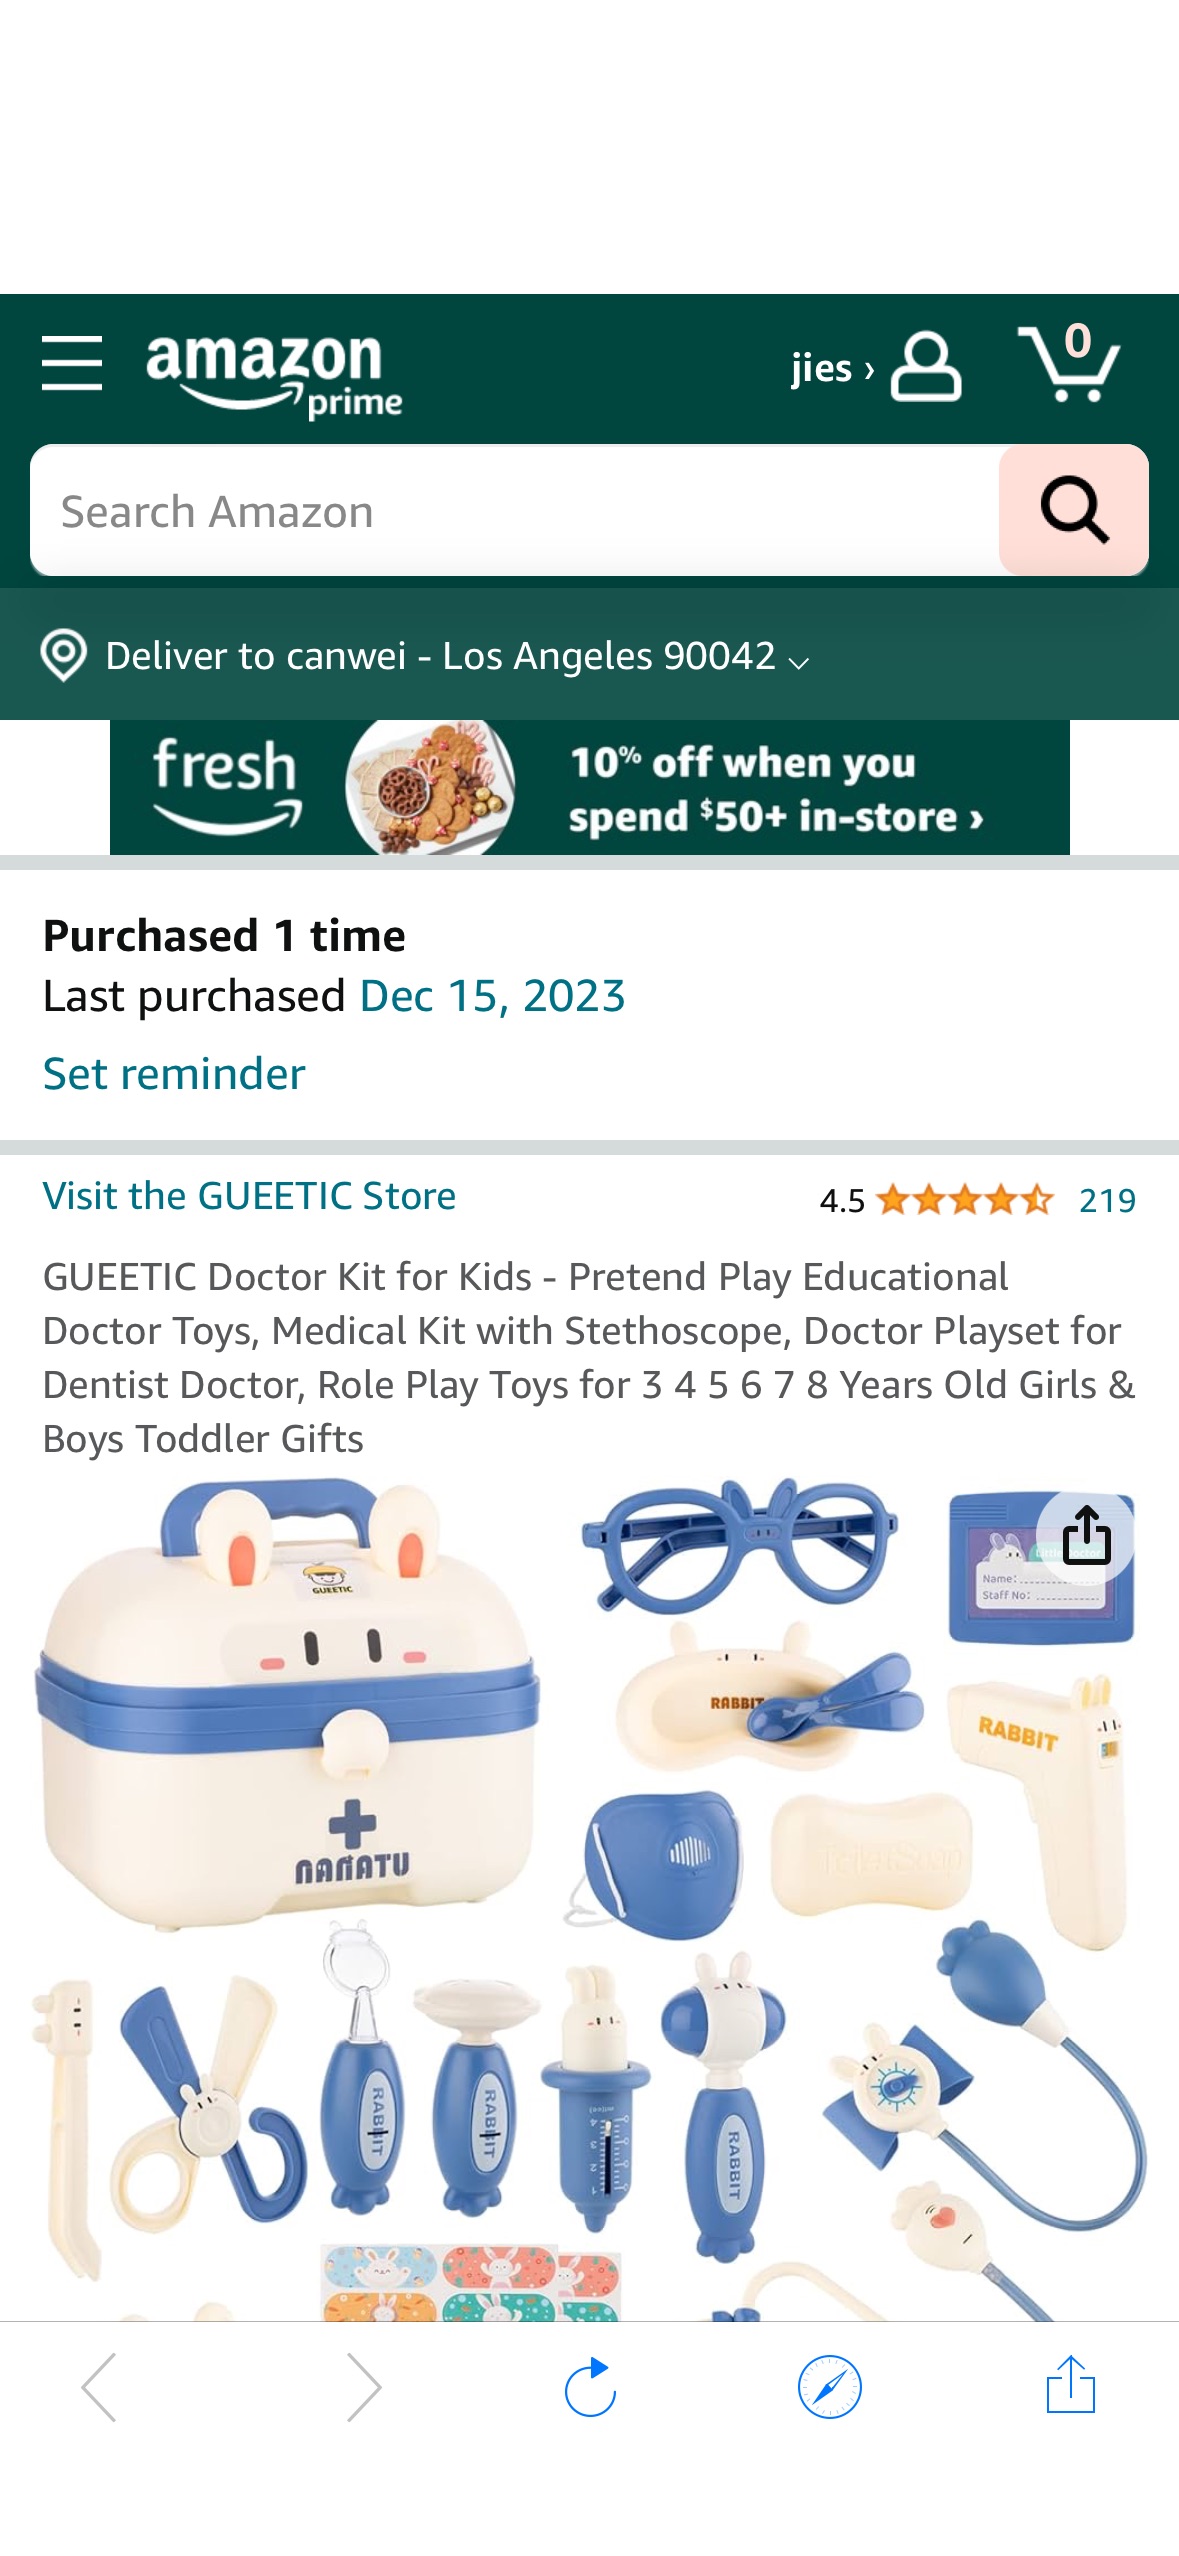 Amazon.com: GUEETIC Doctor Kit for Kids - Pretend Play Educational Doctor Toys, Medical Kit with Stethoscope, Doctor Playset for Dentist Doctor, Role Play Toys for 3 4 5 6 7 8 Years Old Girls & Boys T